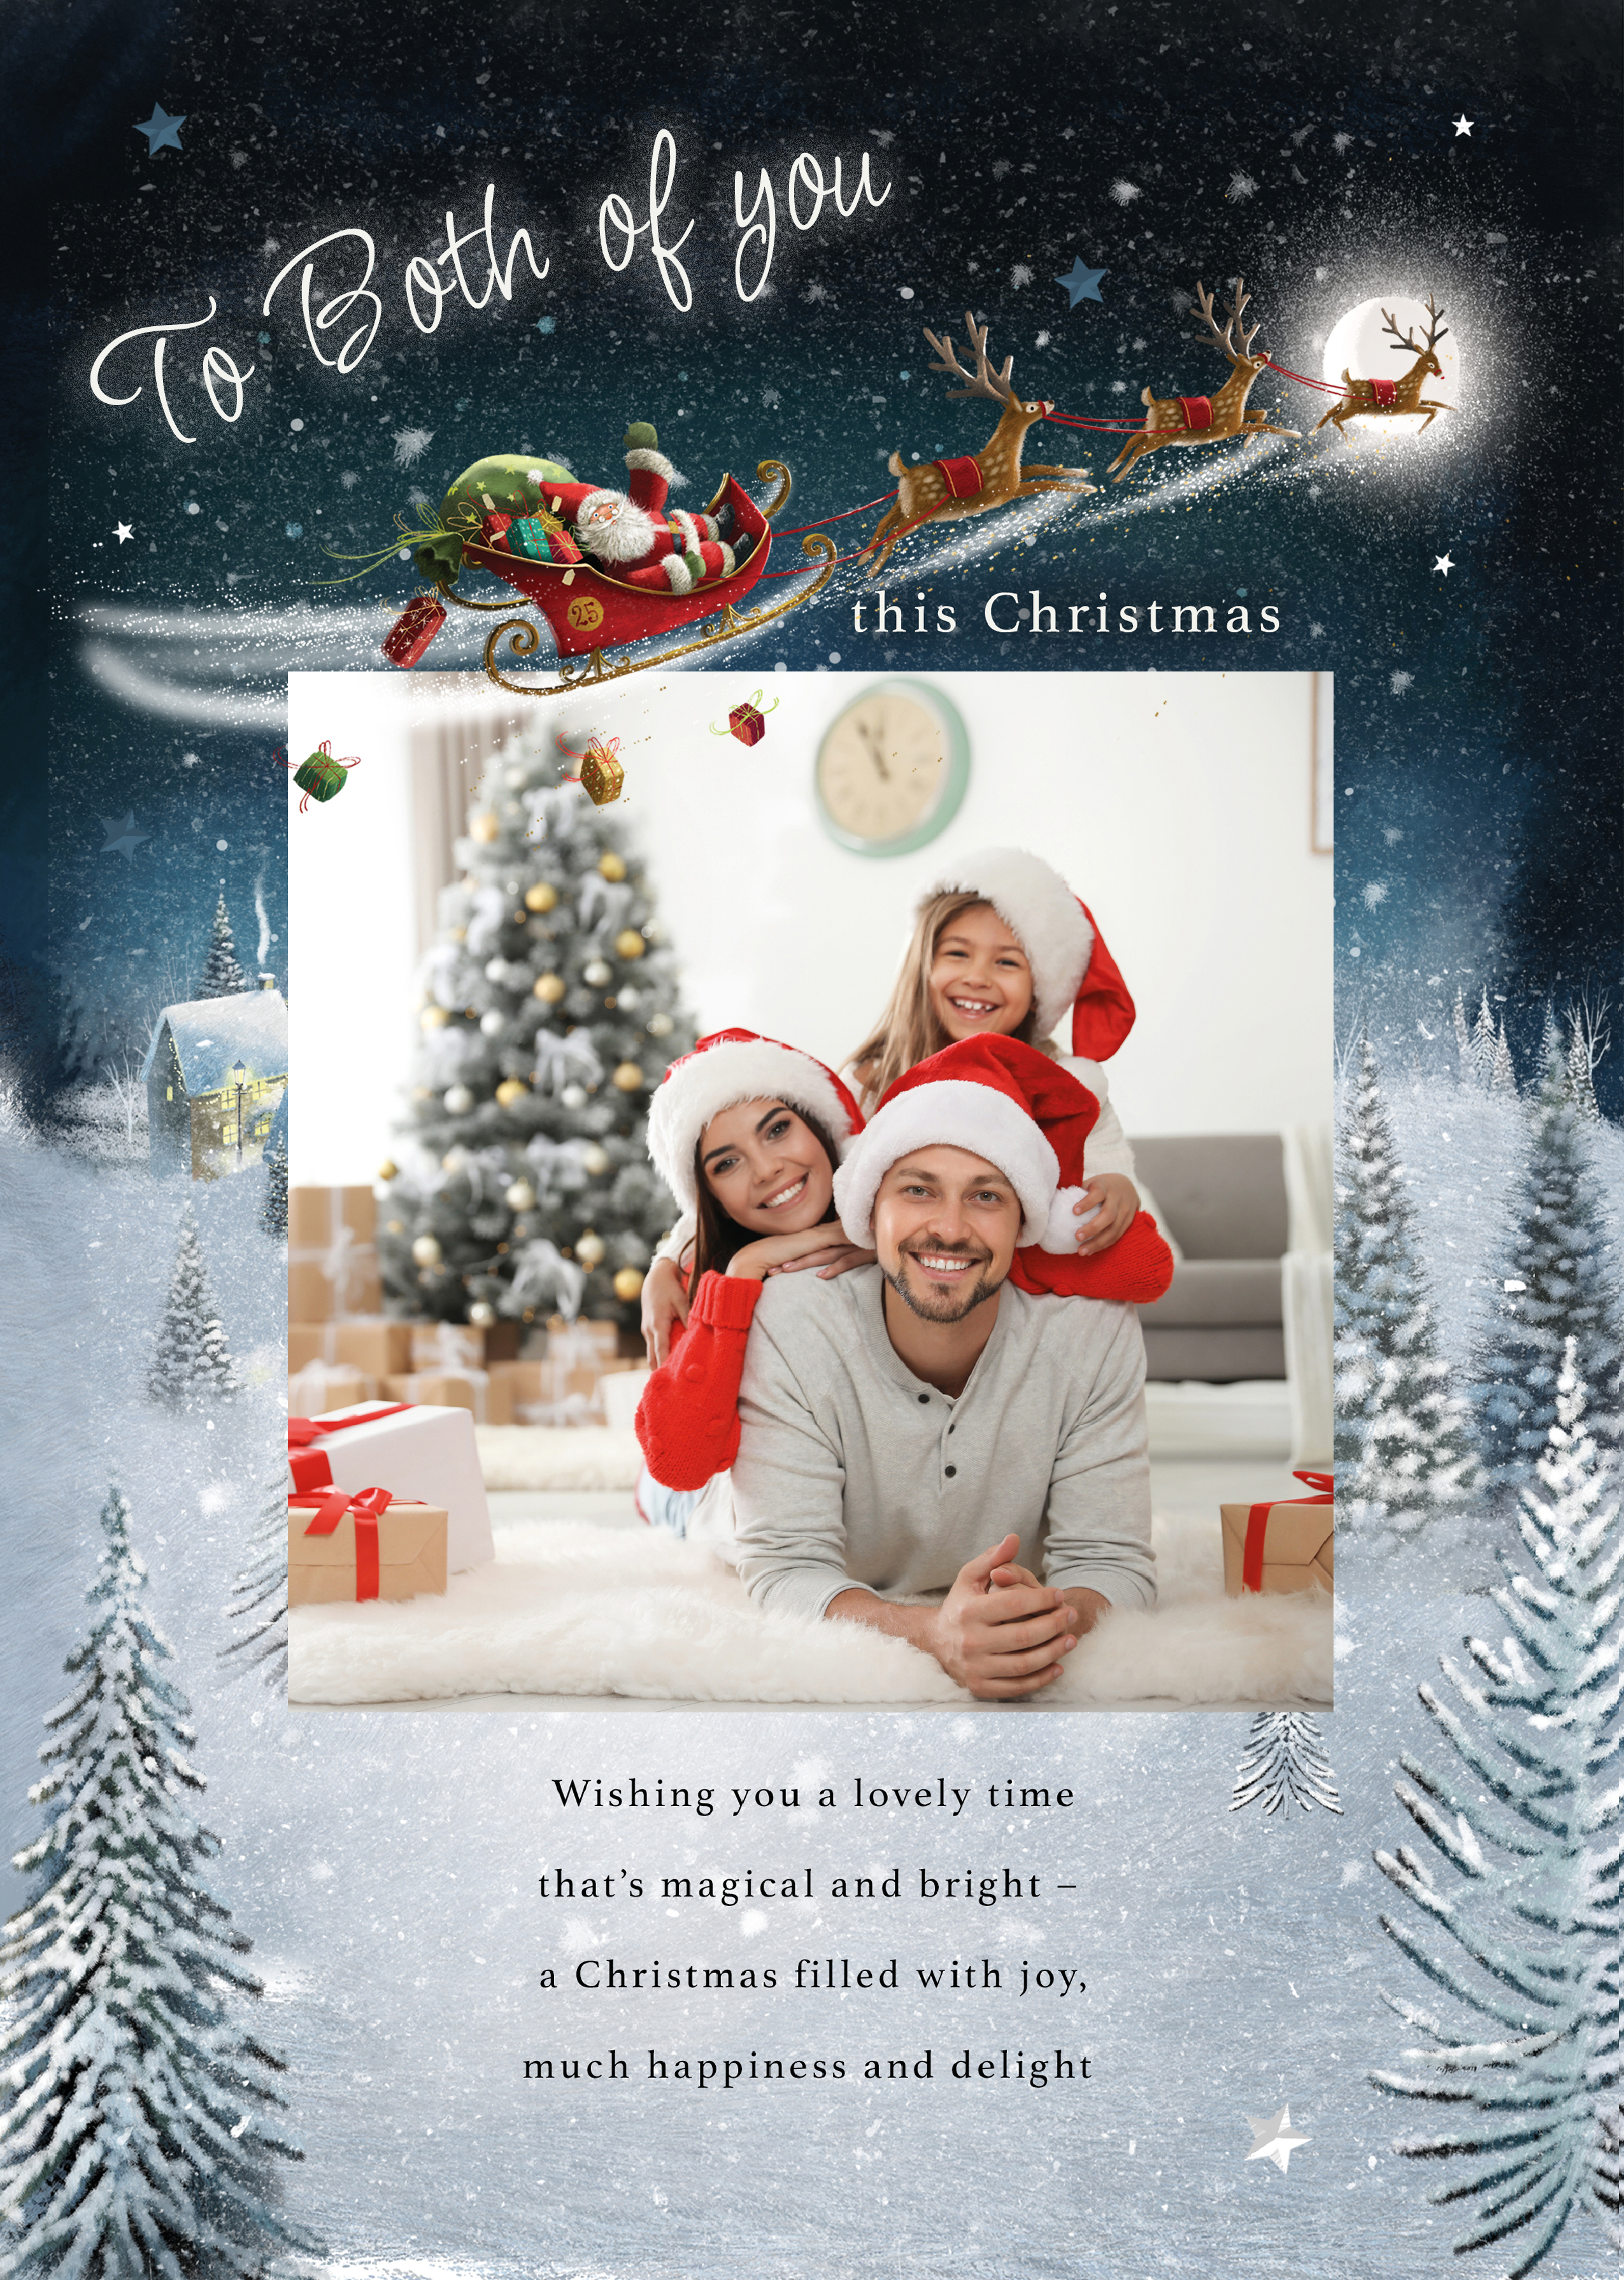 Photo Christmas Card - Santa's Sleigh over Snowy Town, To Both of You